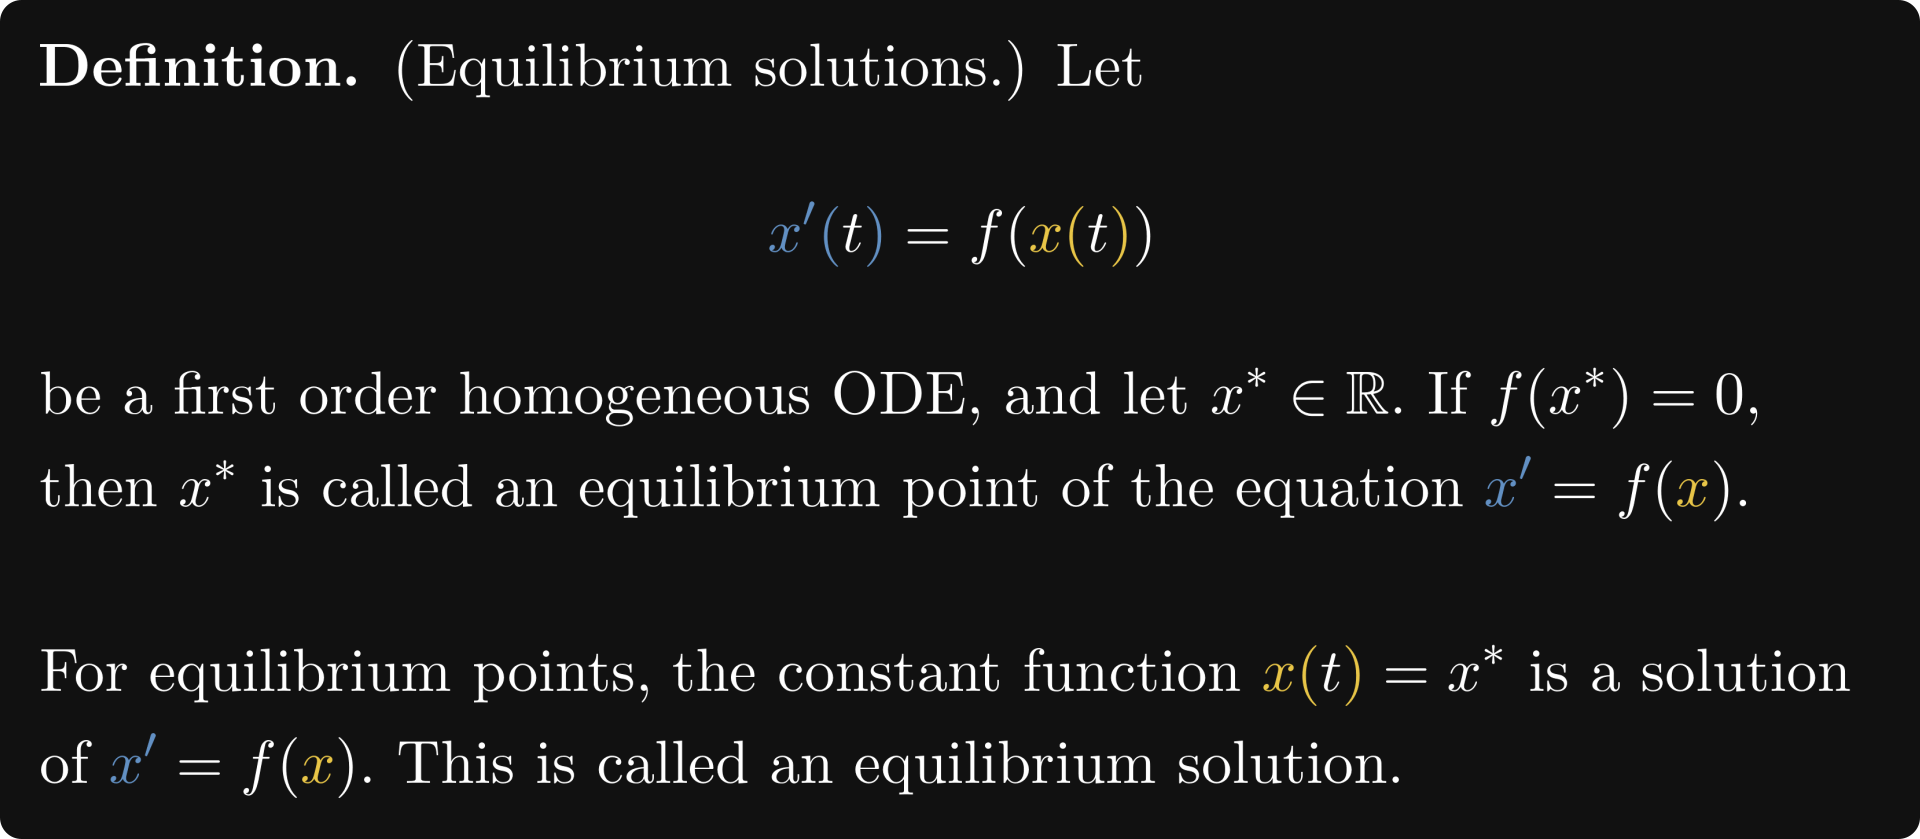 The definition of equilibrium solutions